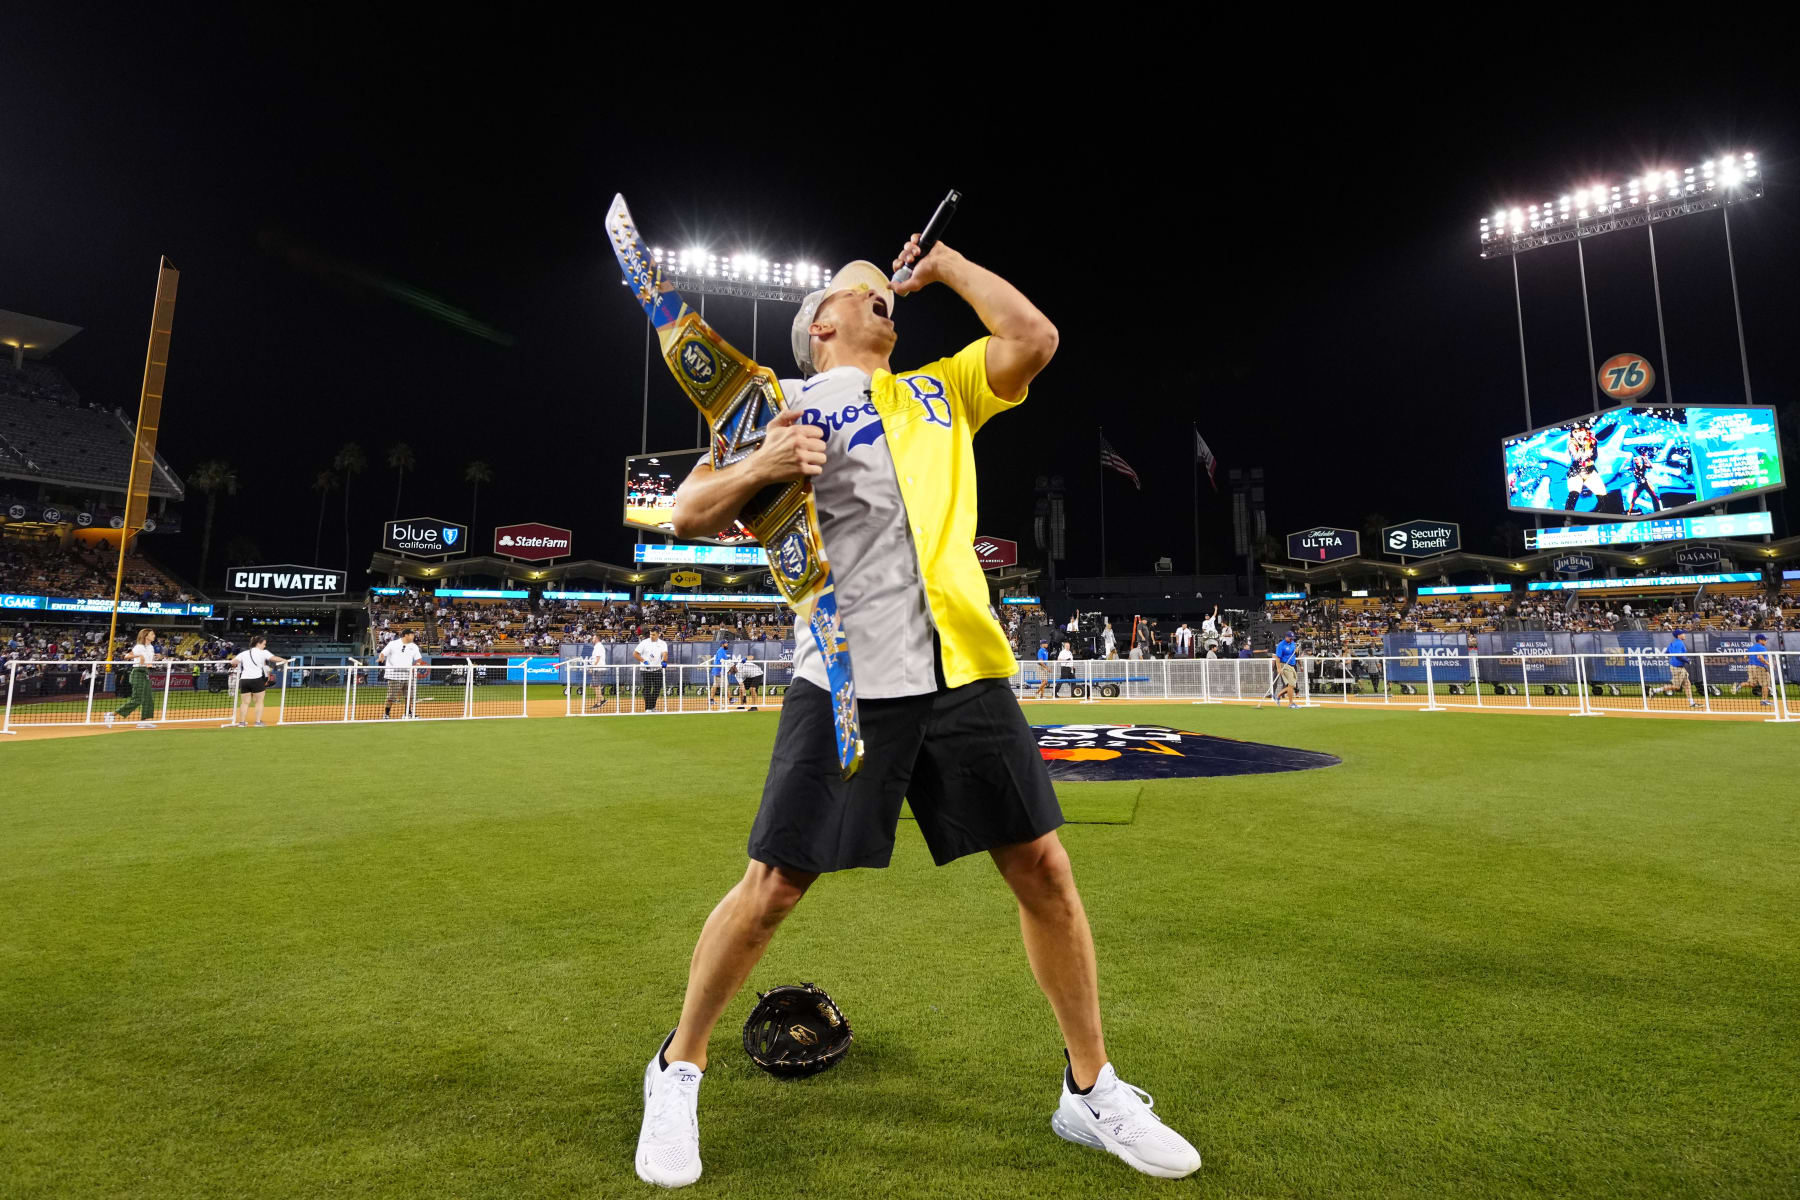 Seattle's stars shine brightest in 2023 Celebrity Softball game as